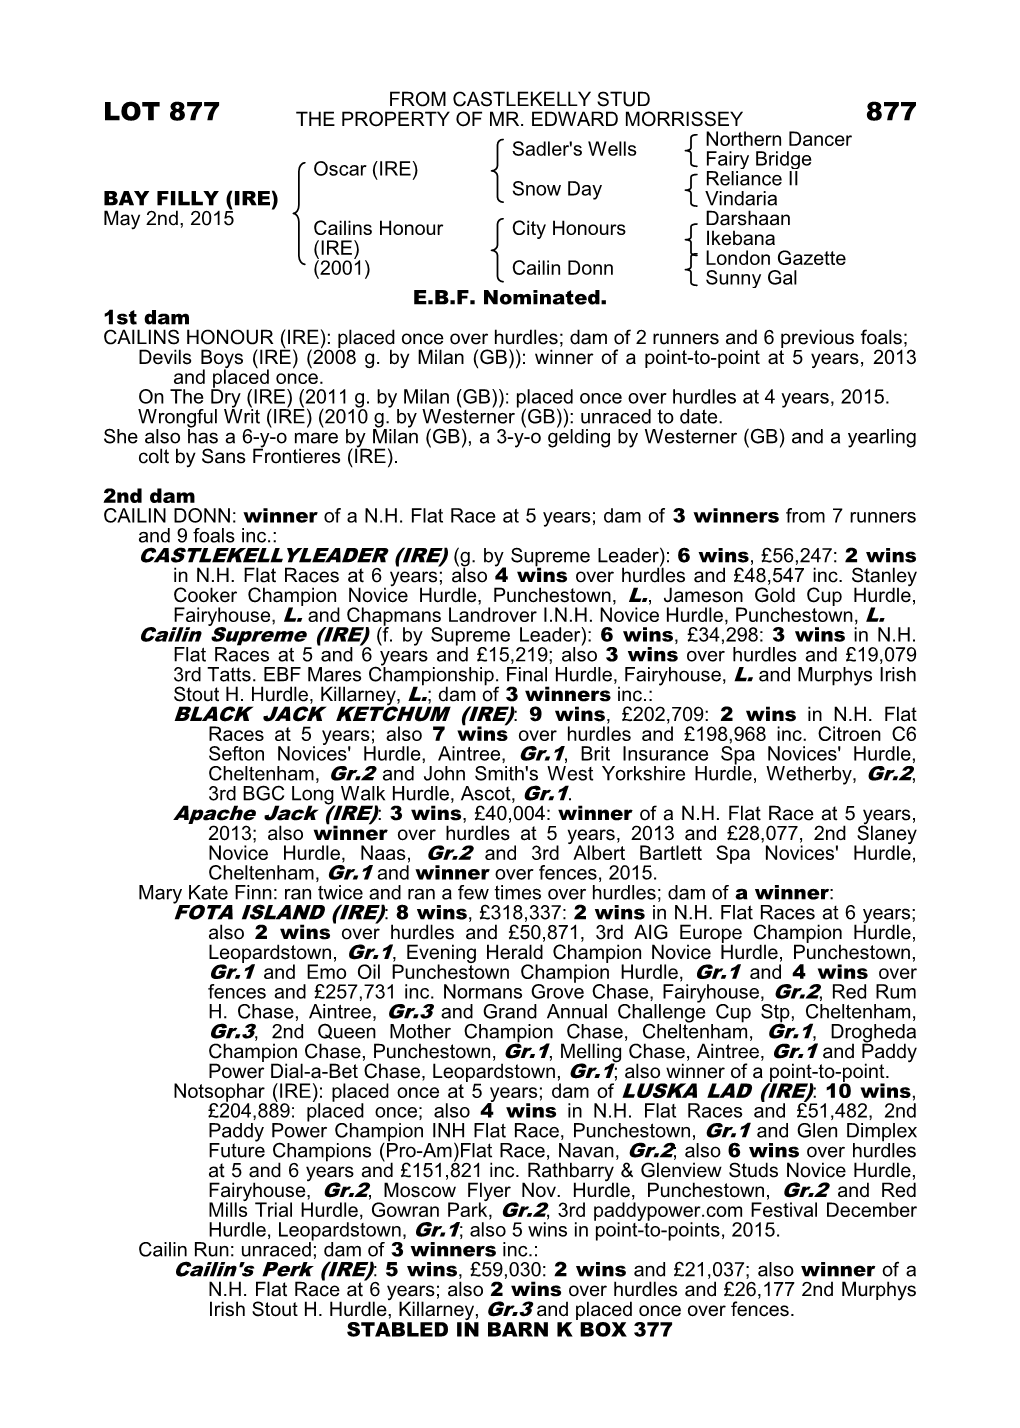 Lot 877 the Property of Mr